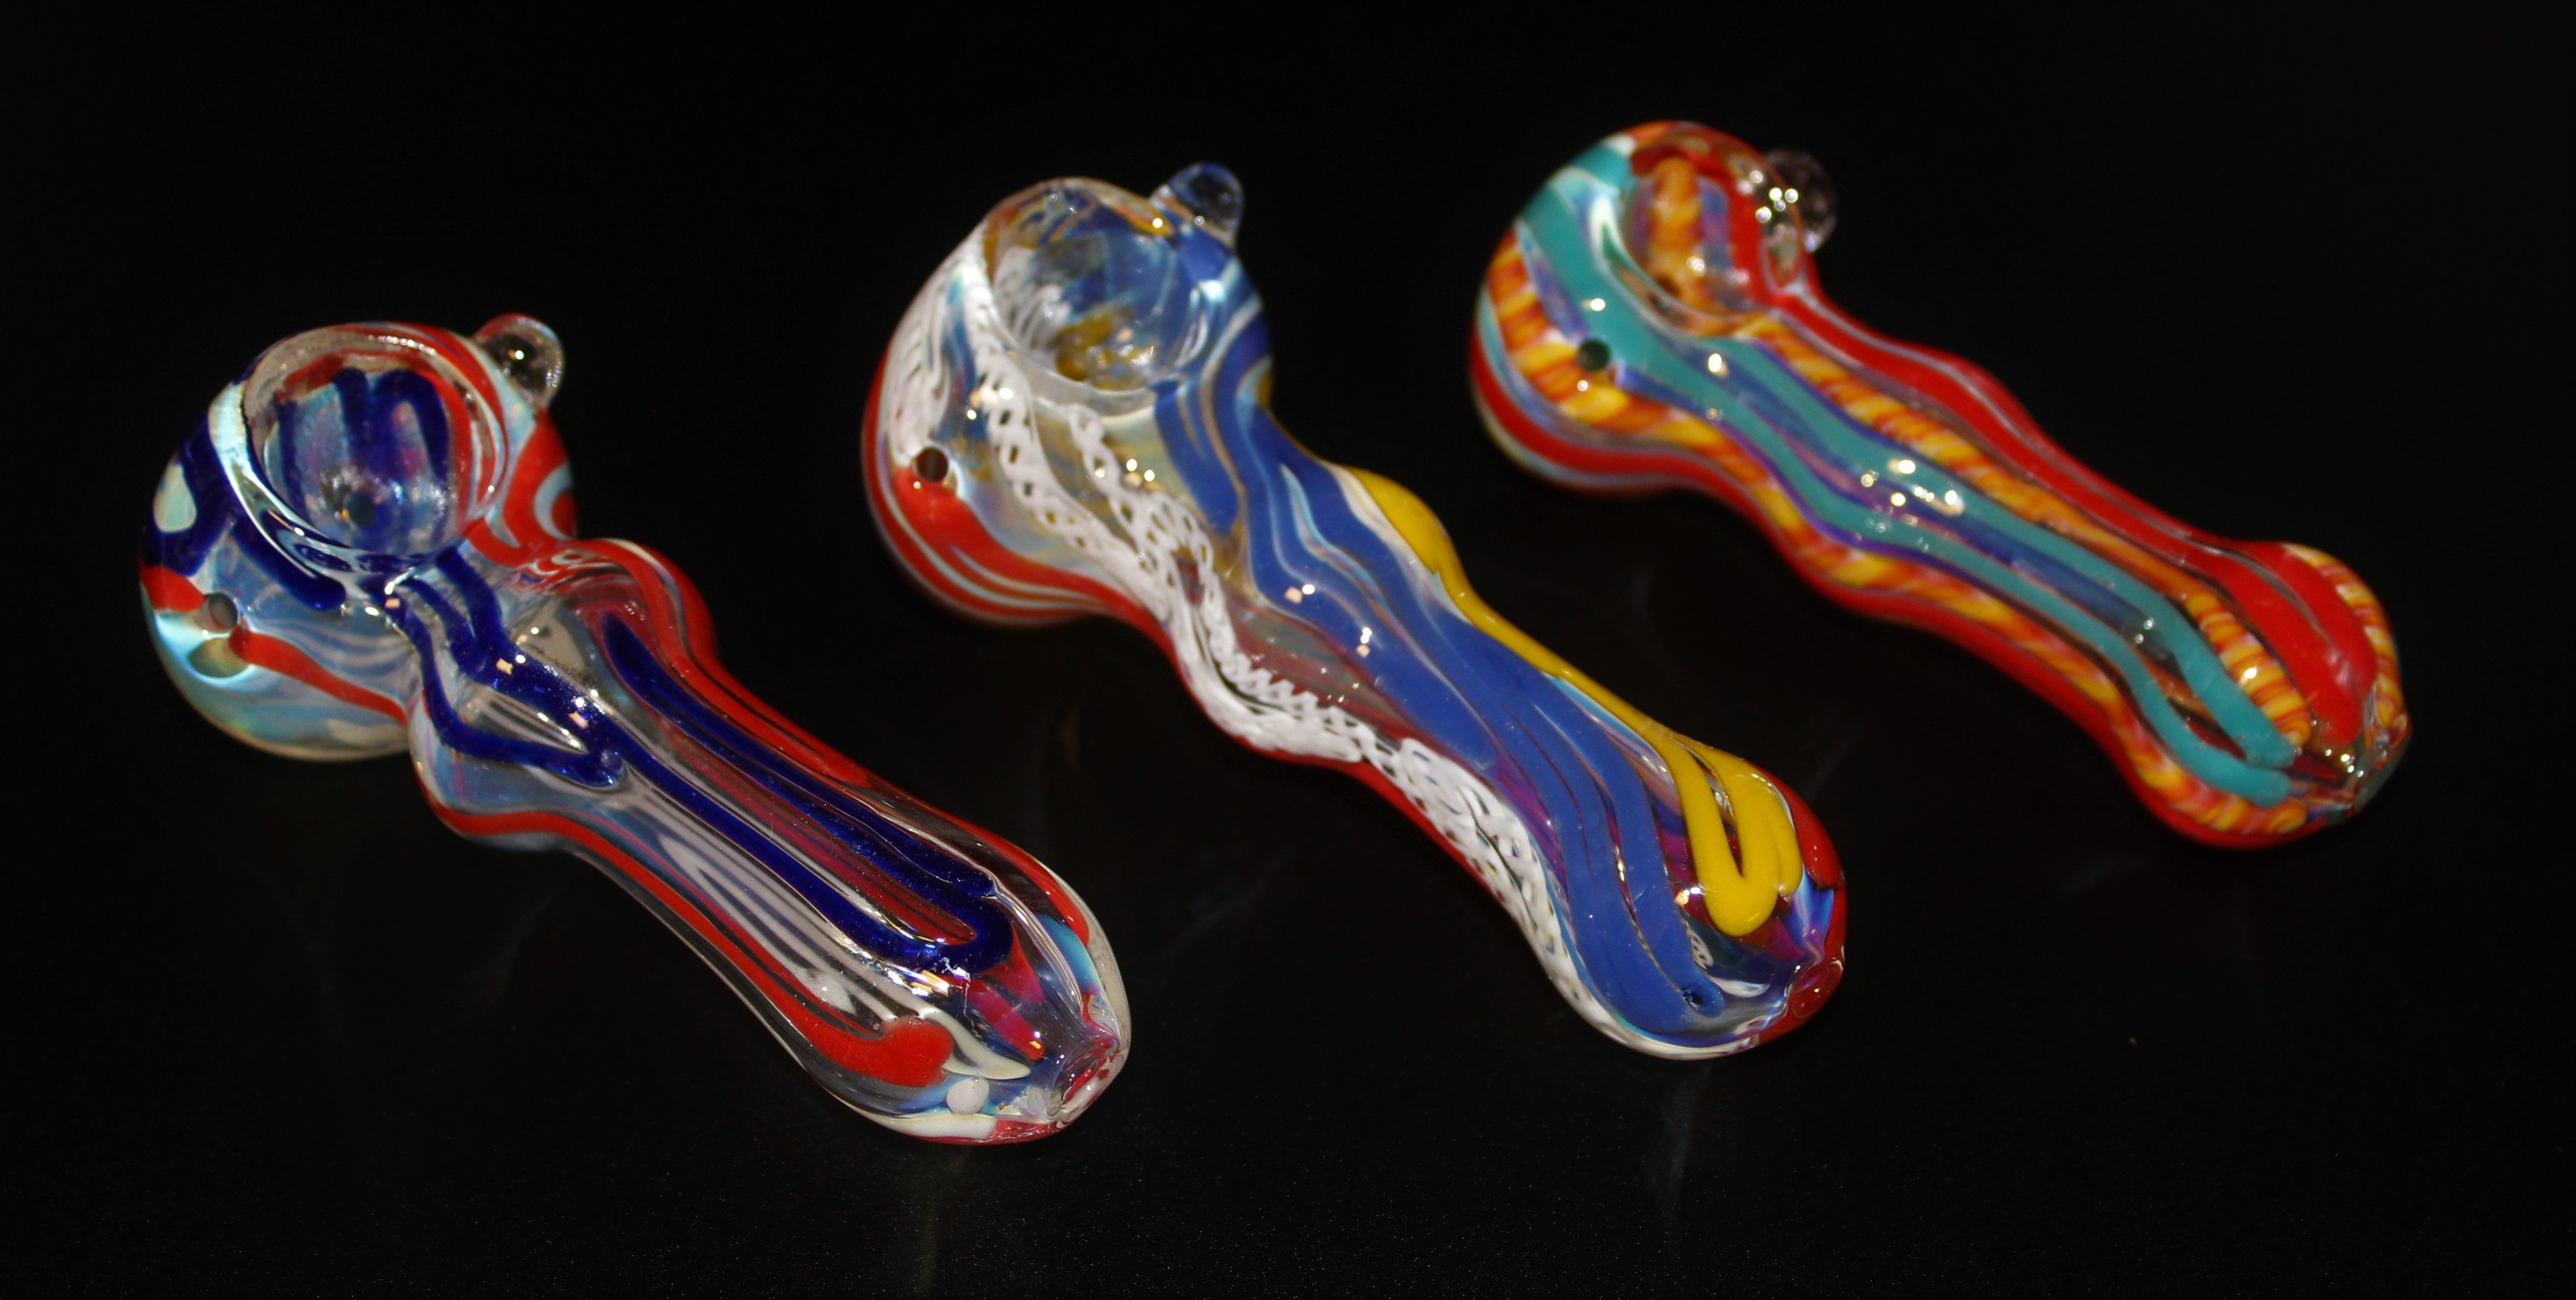 3 1/2 CRYSTAL TWIST Tobacco Smoking Glass Pipe bowl THICK Glass pipes